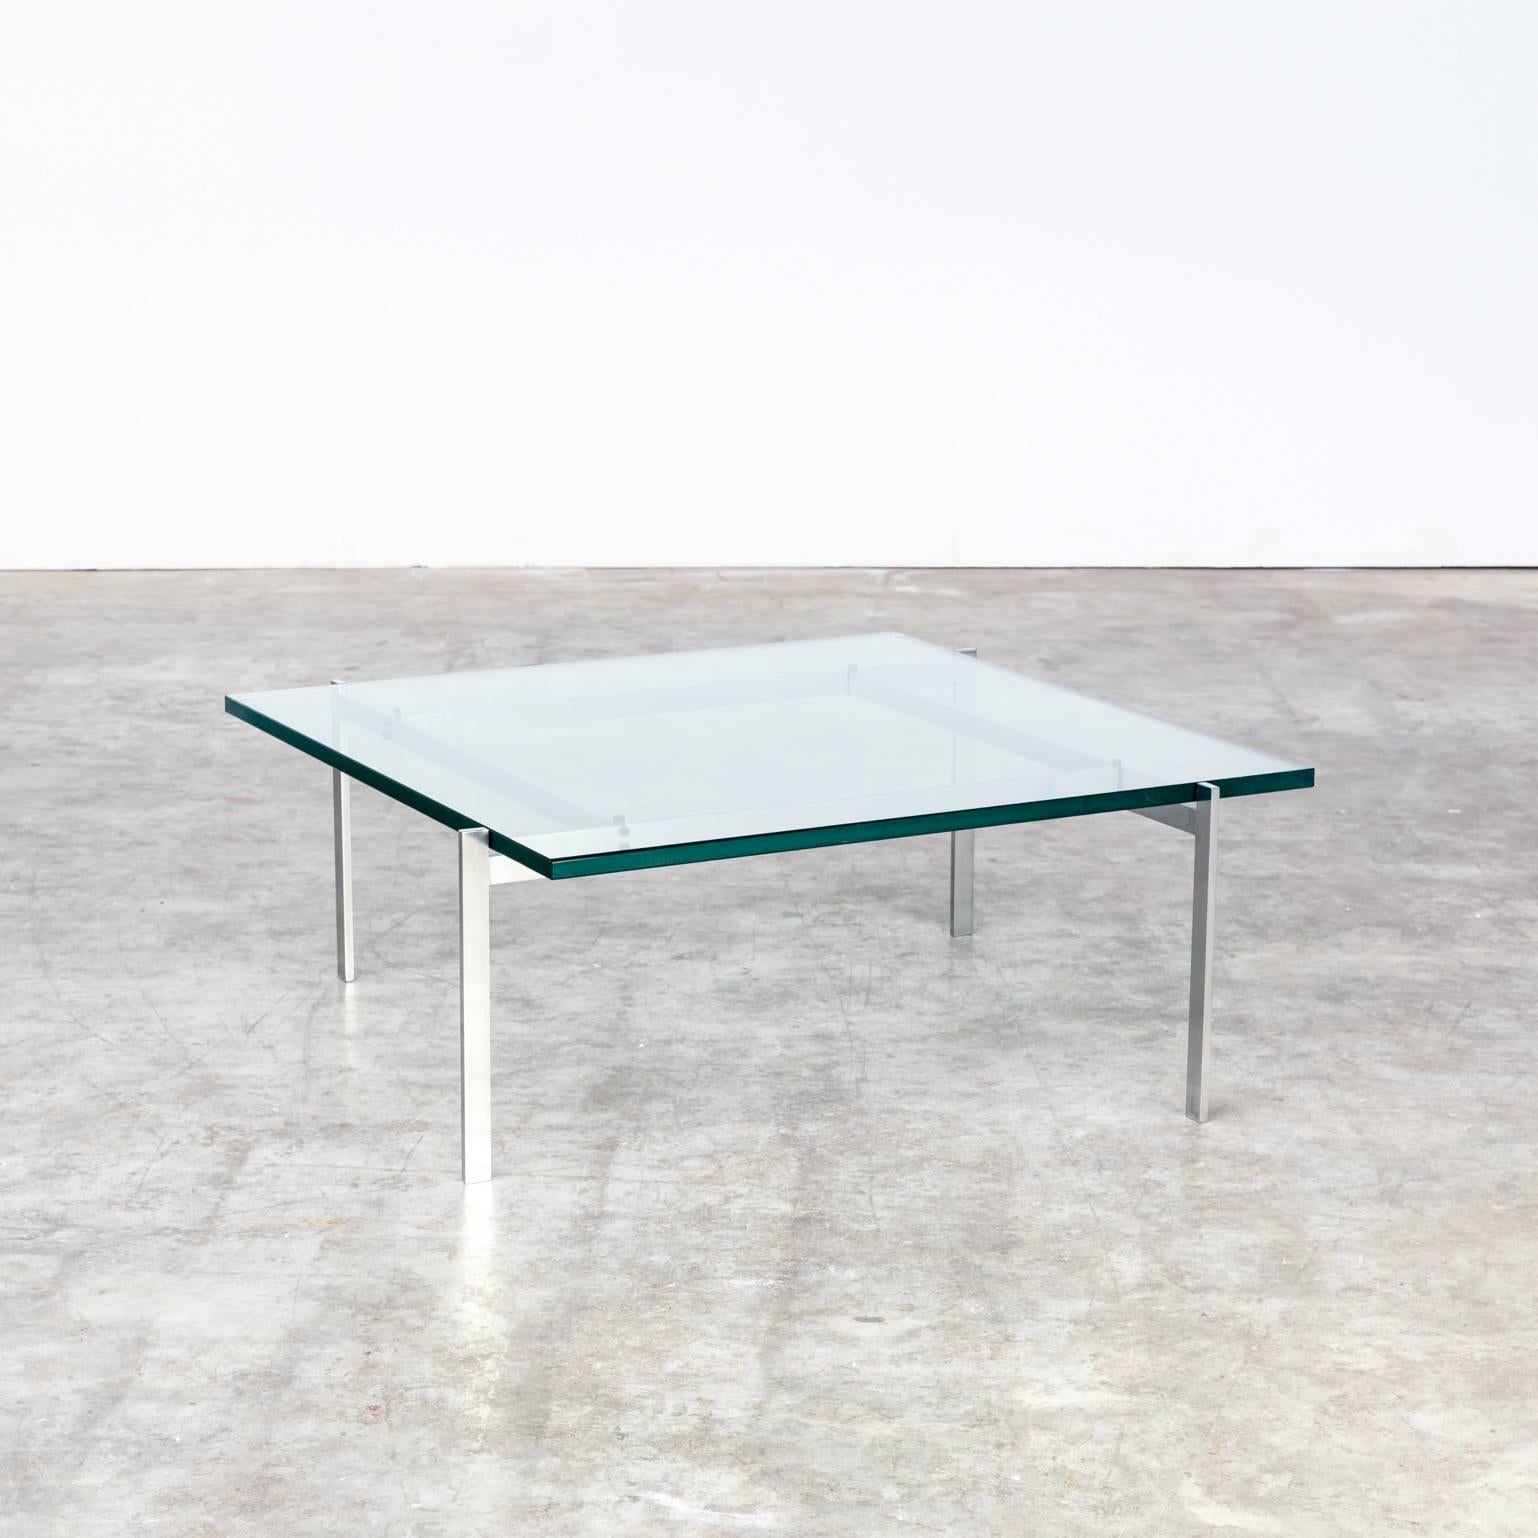 1950s Poul Kjaerholm ‘PK61’ coffee table for EKC. First edition PK61 (EKC), good condition, wear consistent with age and use, with beautiful patina on the stainless steel.